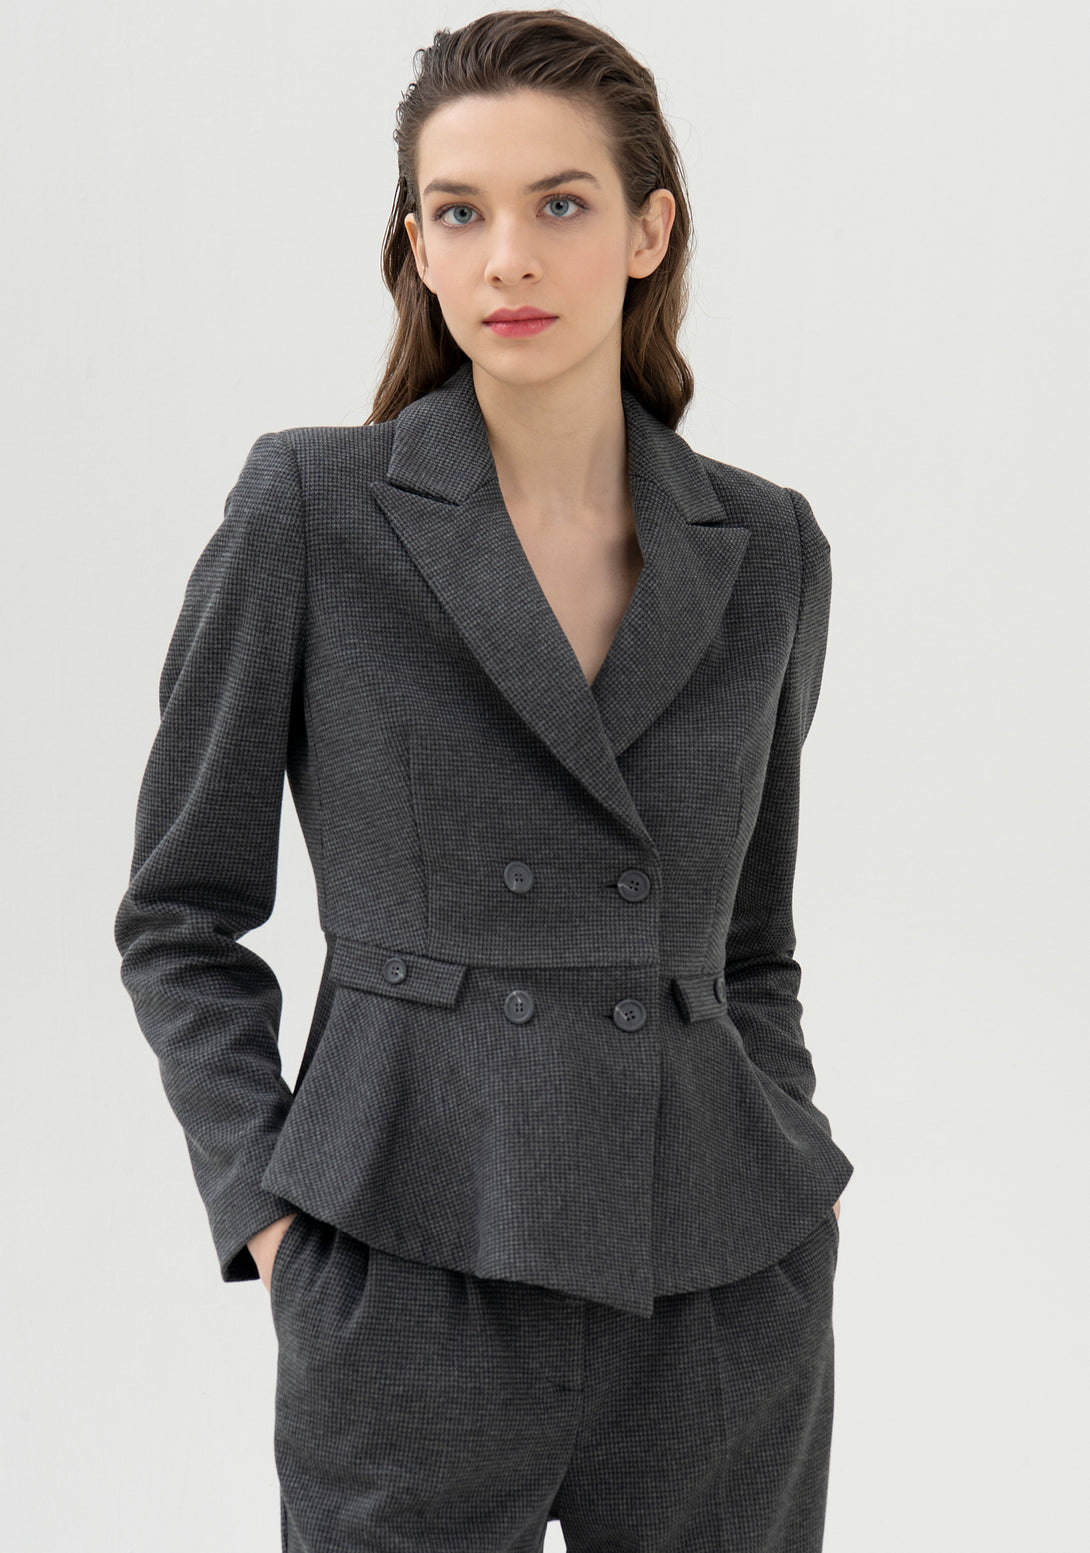 Blazer tight fit double breasted made in pied de poule fabric